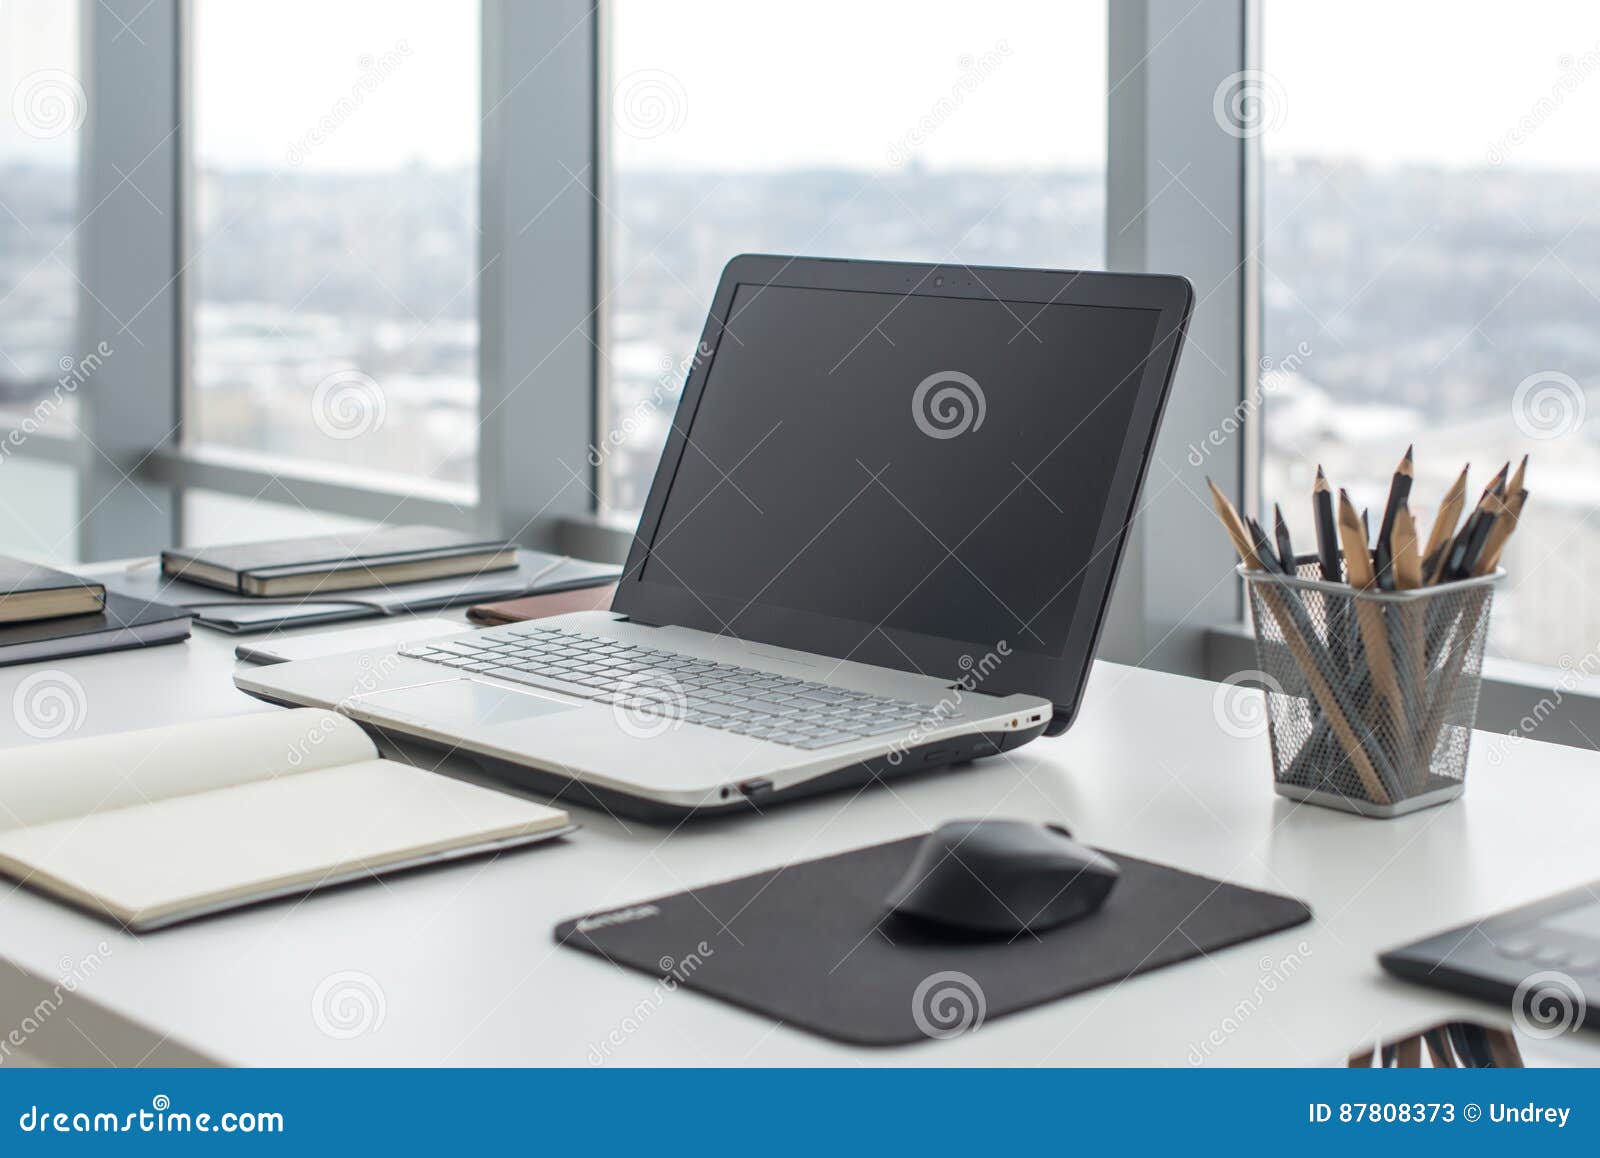 sideview of office desktop with blank laptop and various tools.